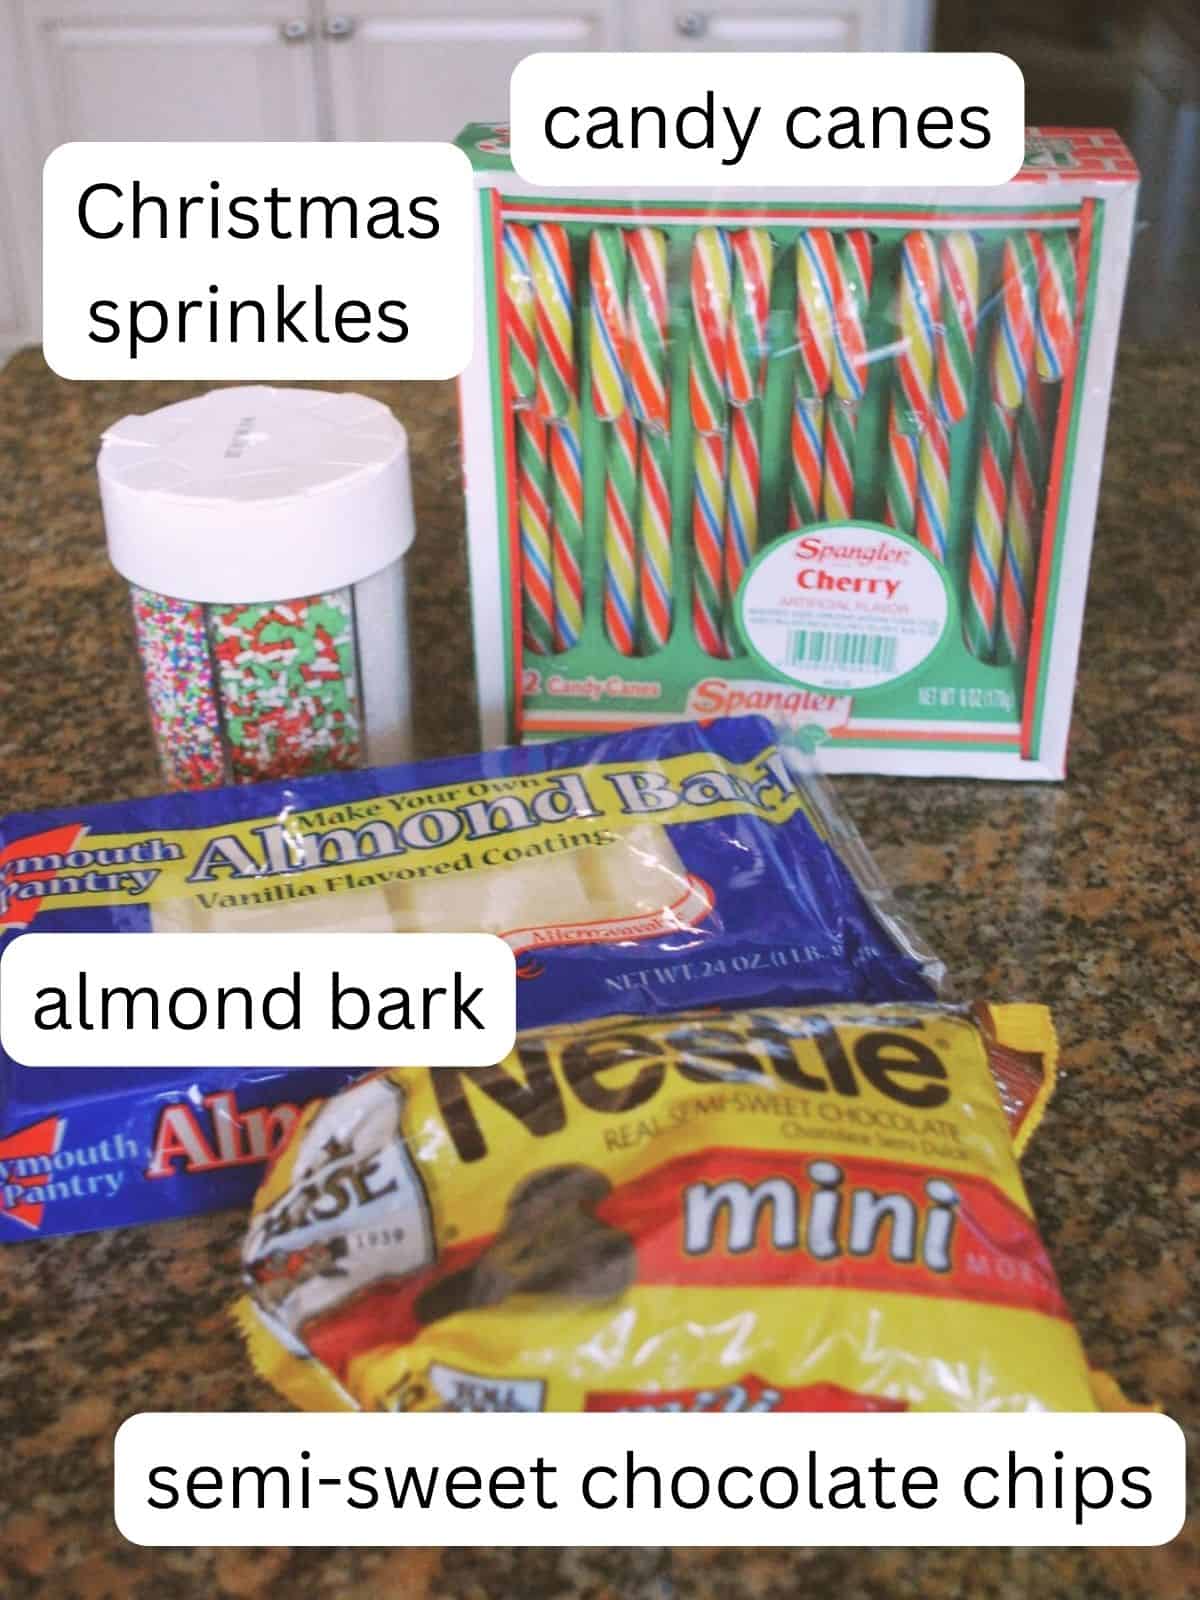 candy cane bark ingredients.